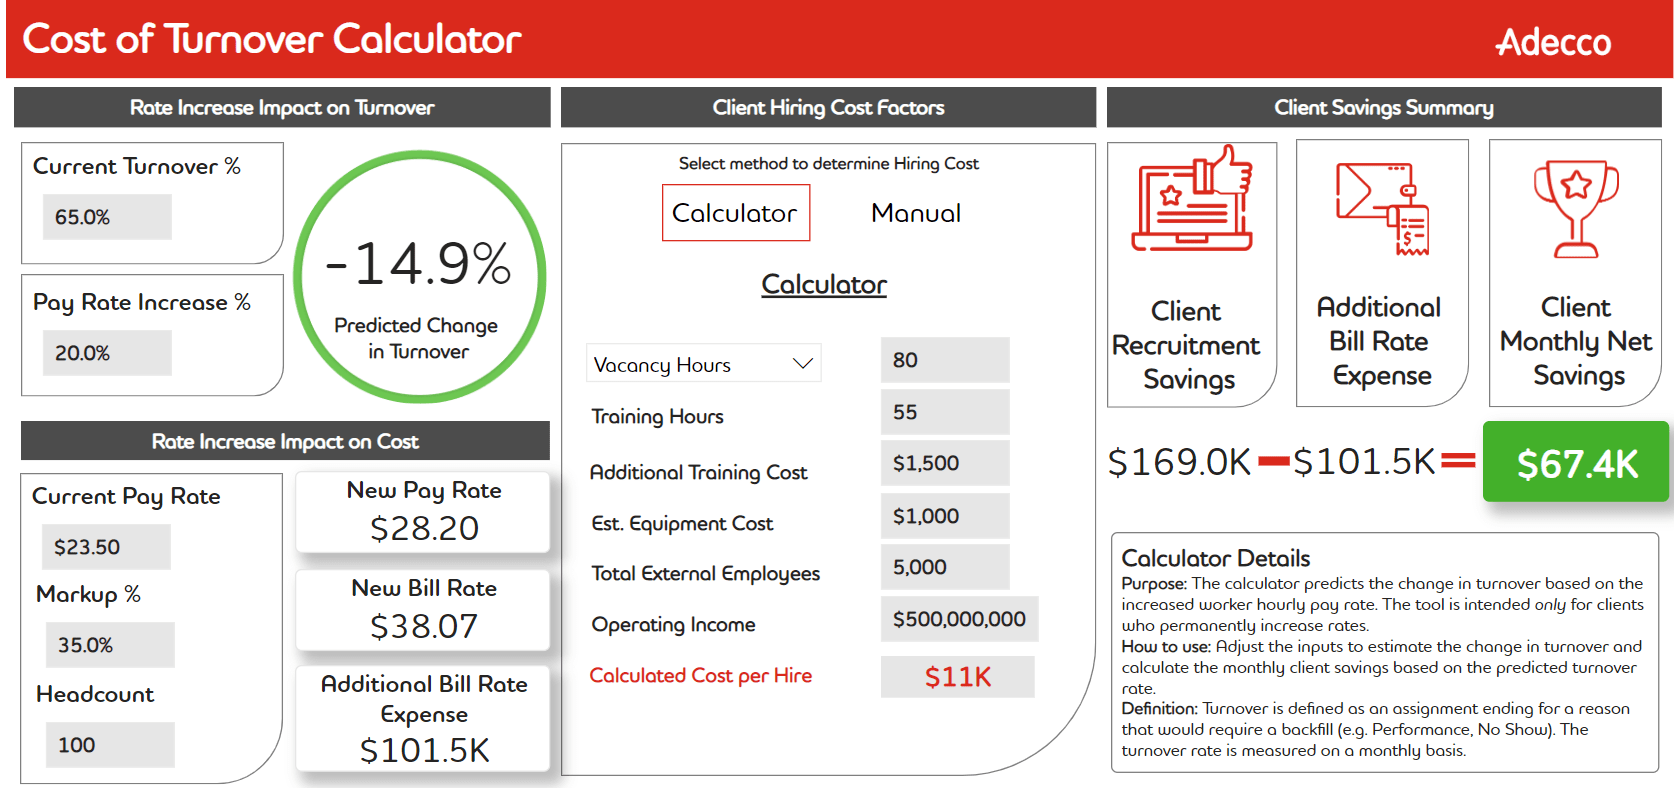 Cost of turnover calculator infographic